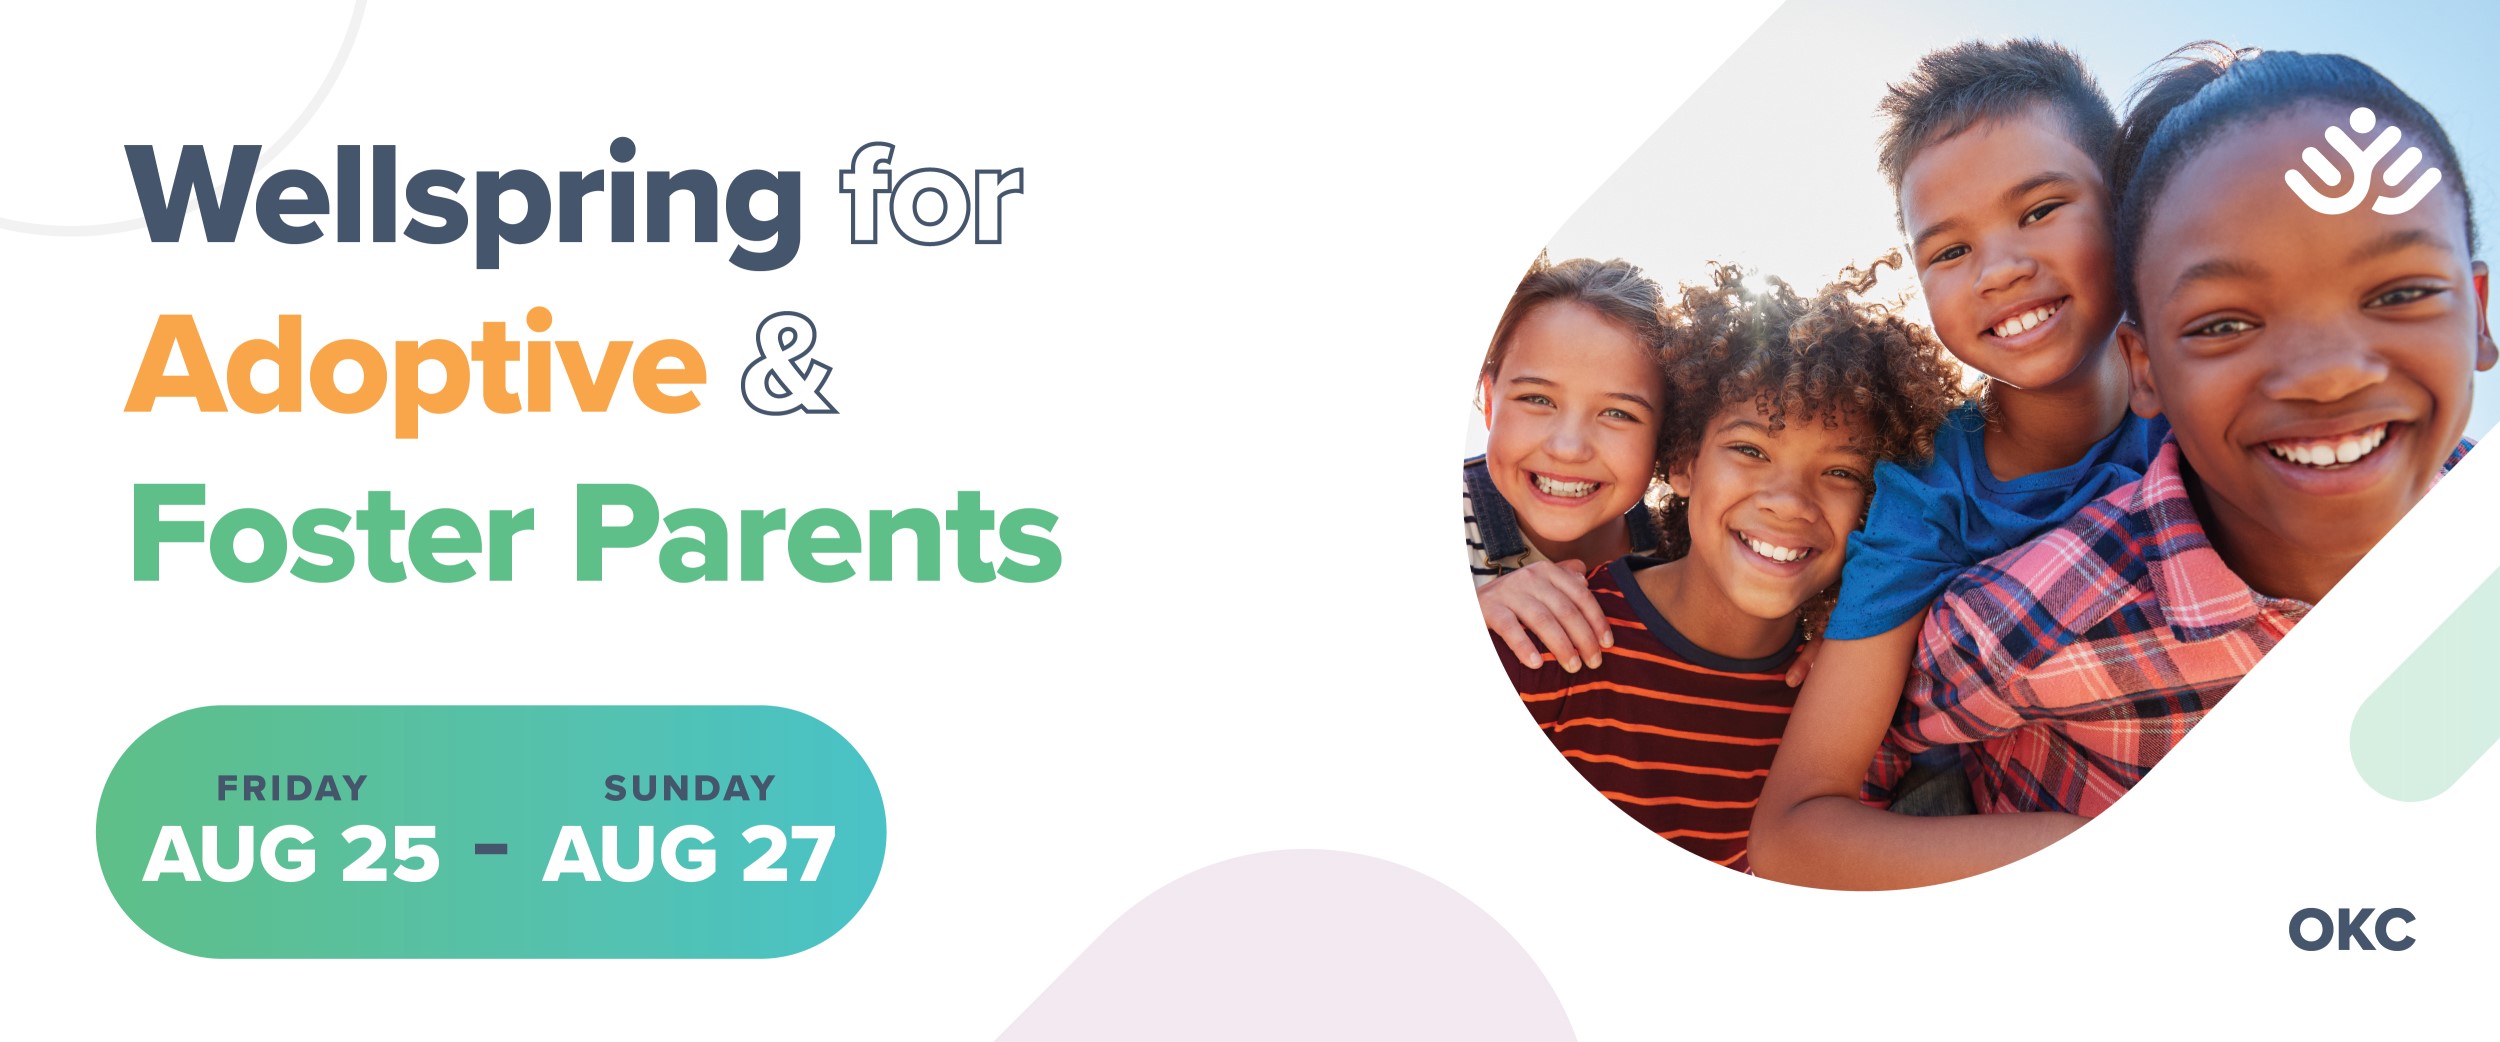 Wellspring for Adoptive & Foster Parents | Aug 25 - Aug 27